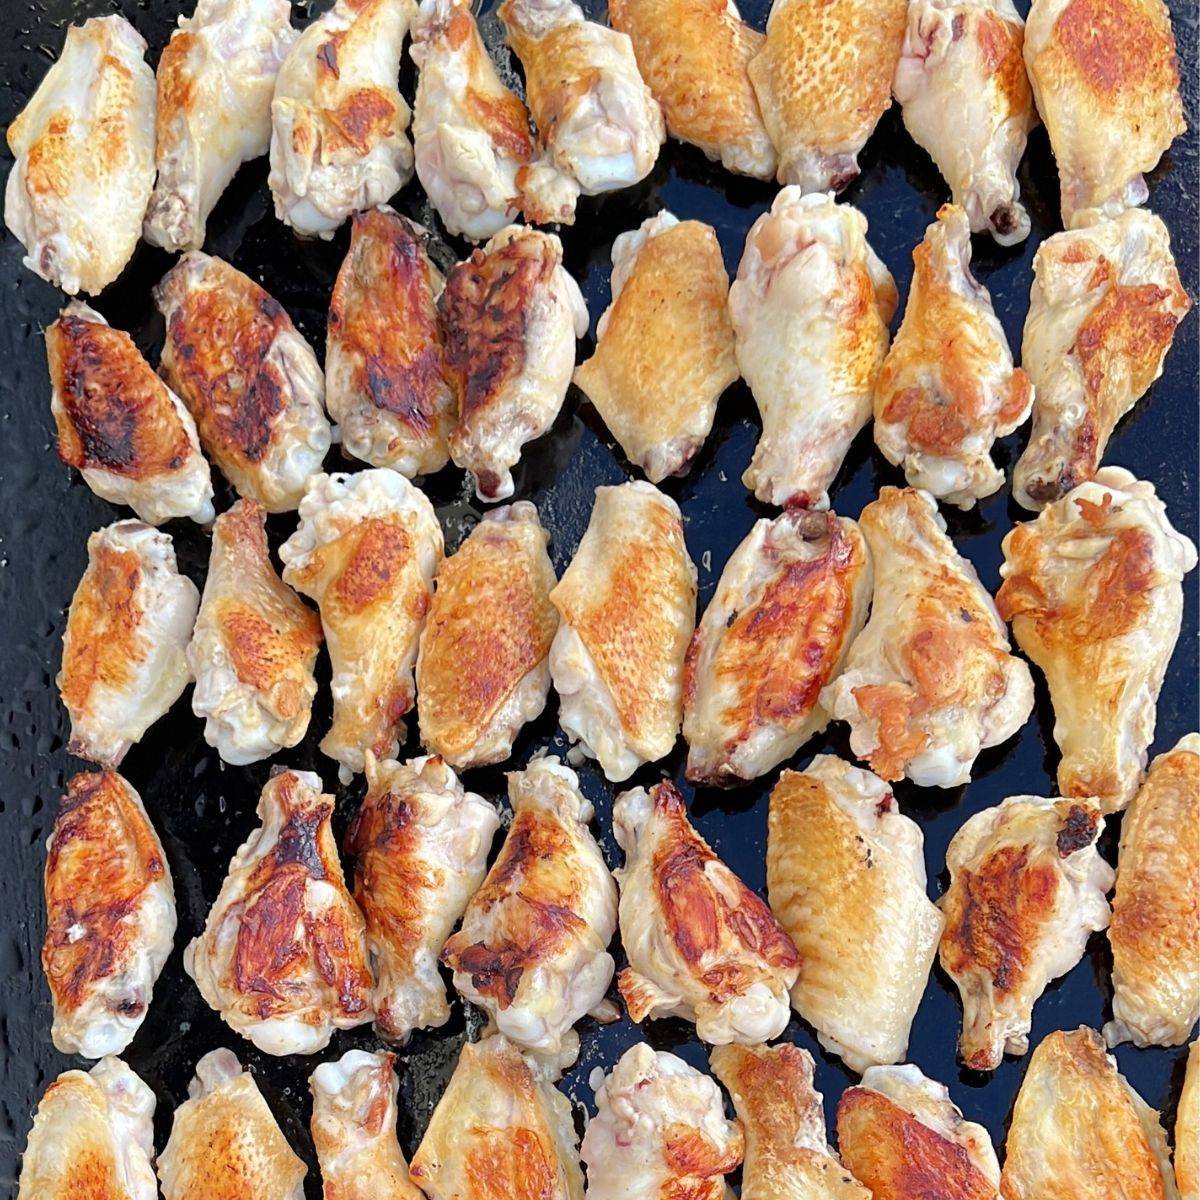 https://bestblackstonerecipes.com/wp-content/uploads/2022/12/Mastering-How-to-Cook-Wings-on-Blackstone-Griddle-7.jpg